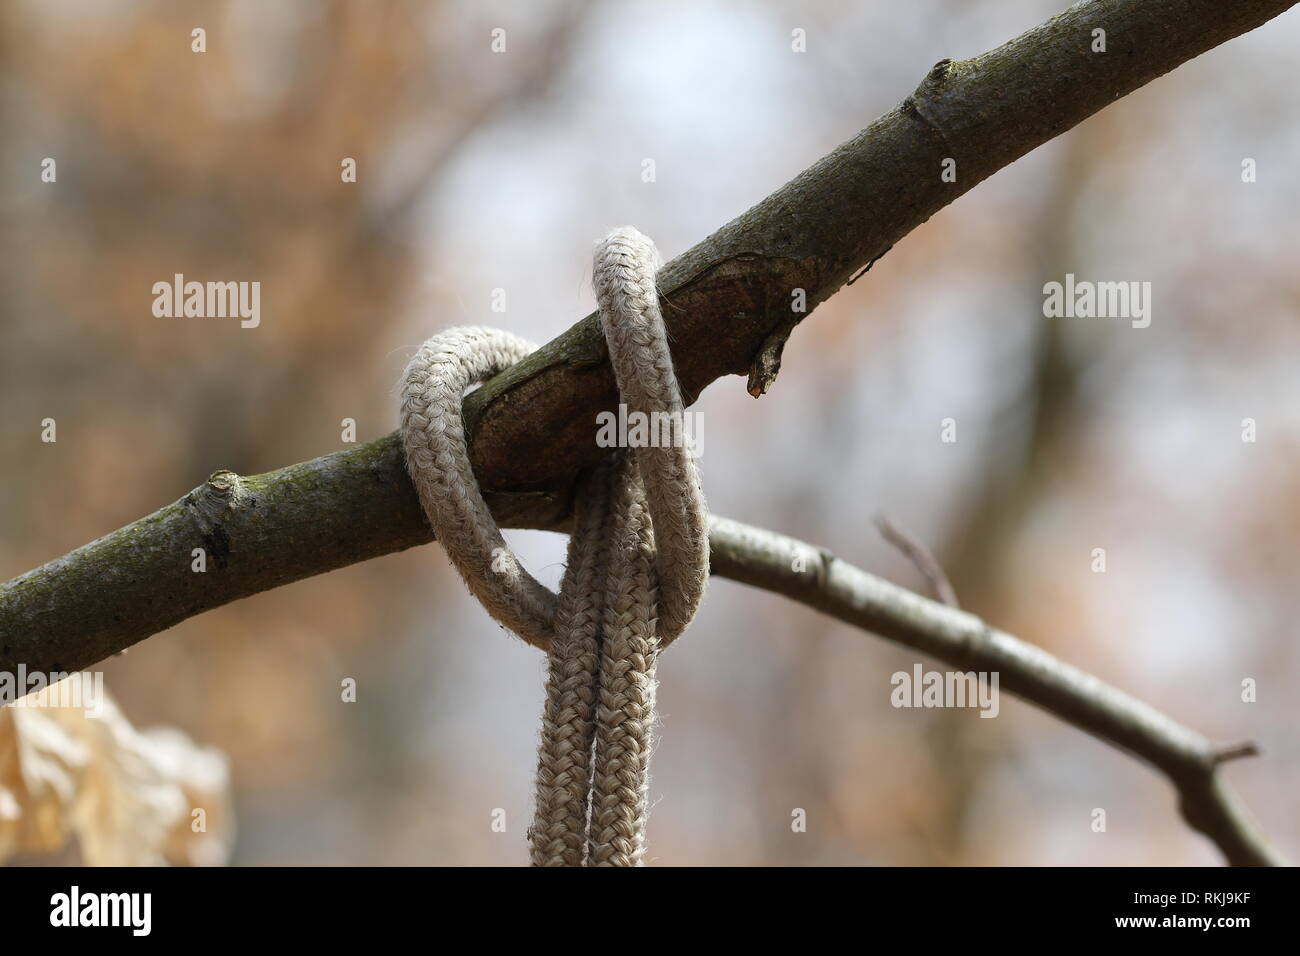 Rope tied in a tree Stock Photo - Alamy